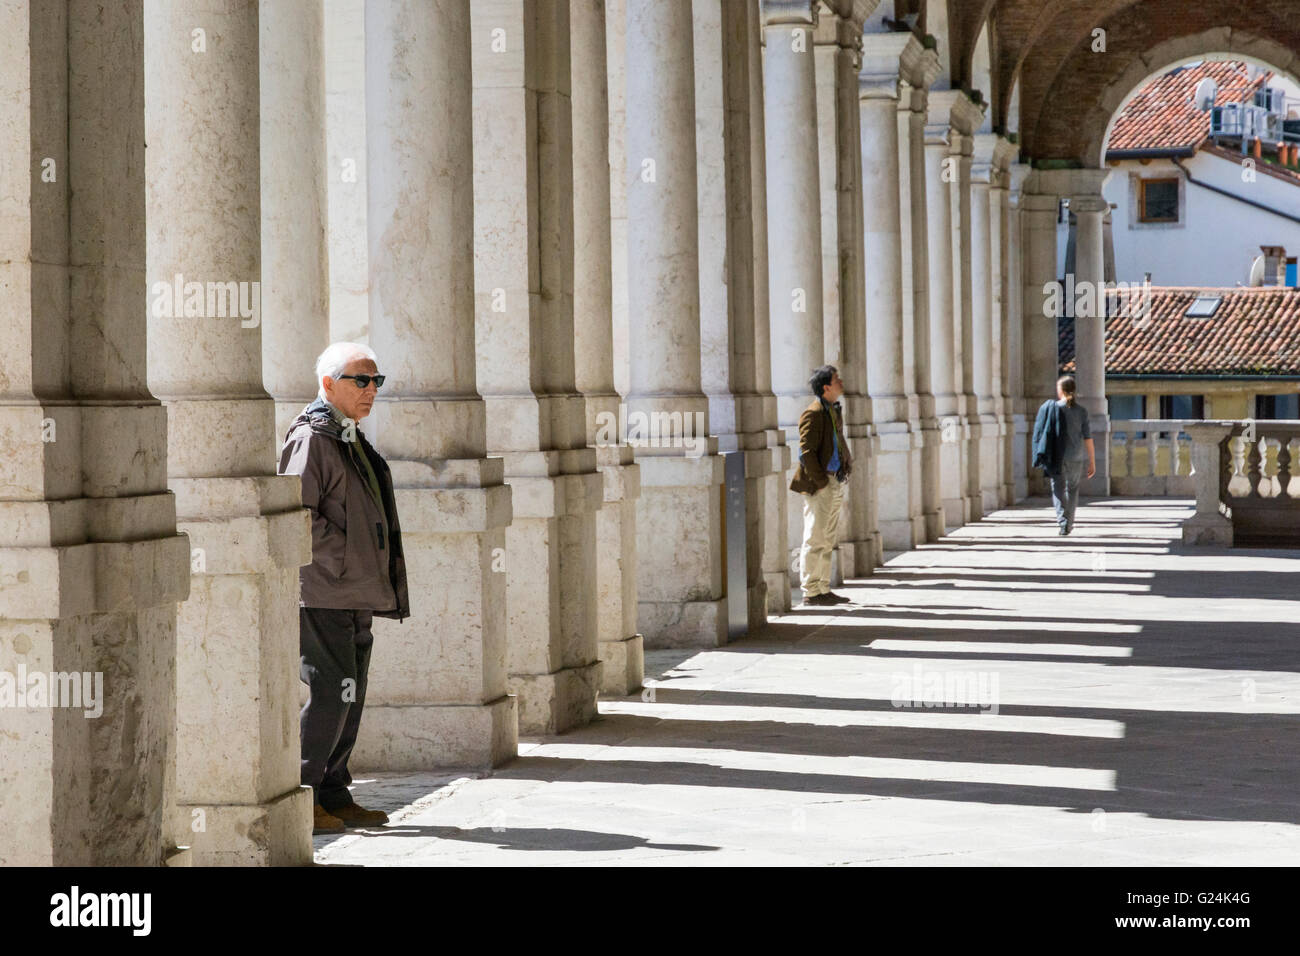 Vicenza,Italy-April 3,2015:people on  the  famous colonnade of the Palladian basilica in the center of Vicenza during a sunny da Stock Photo